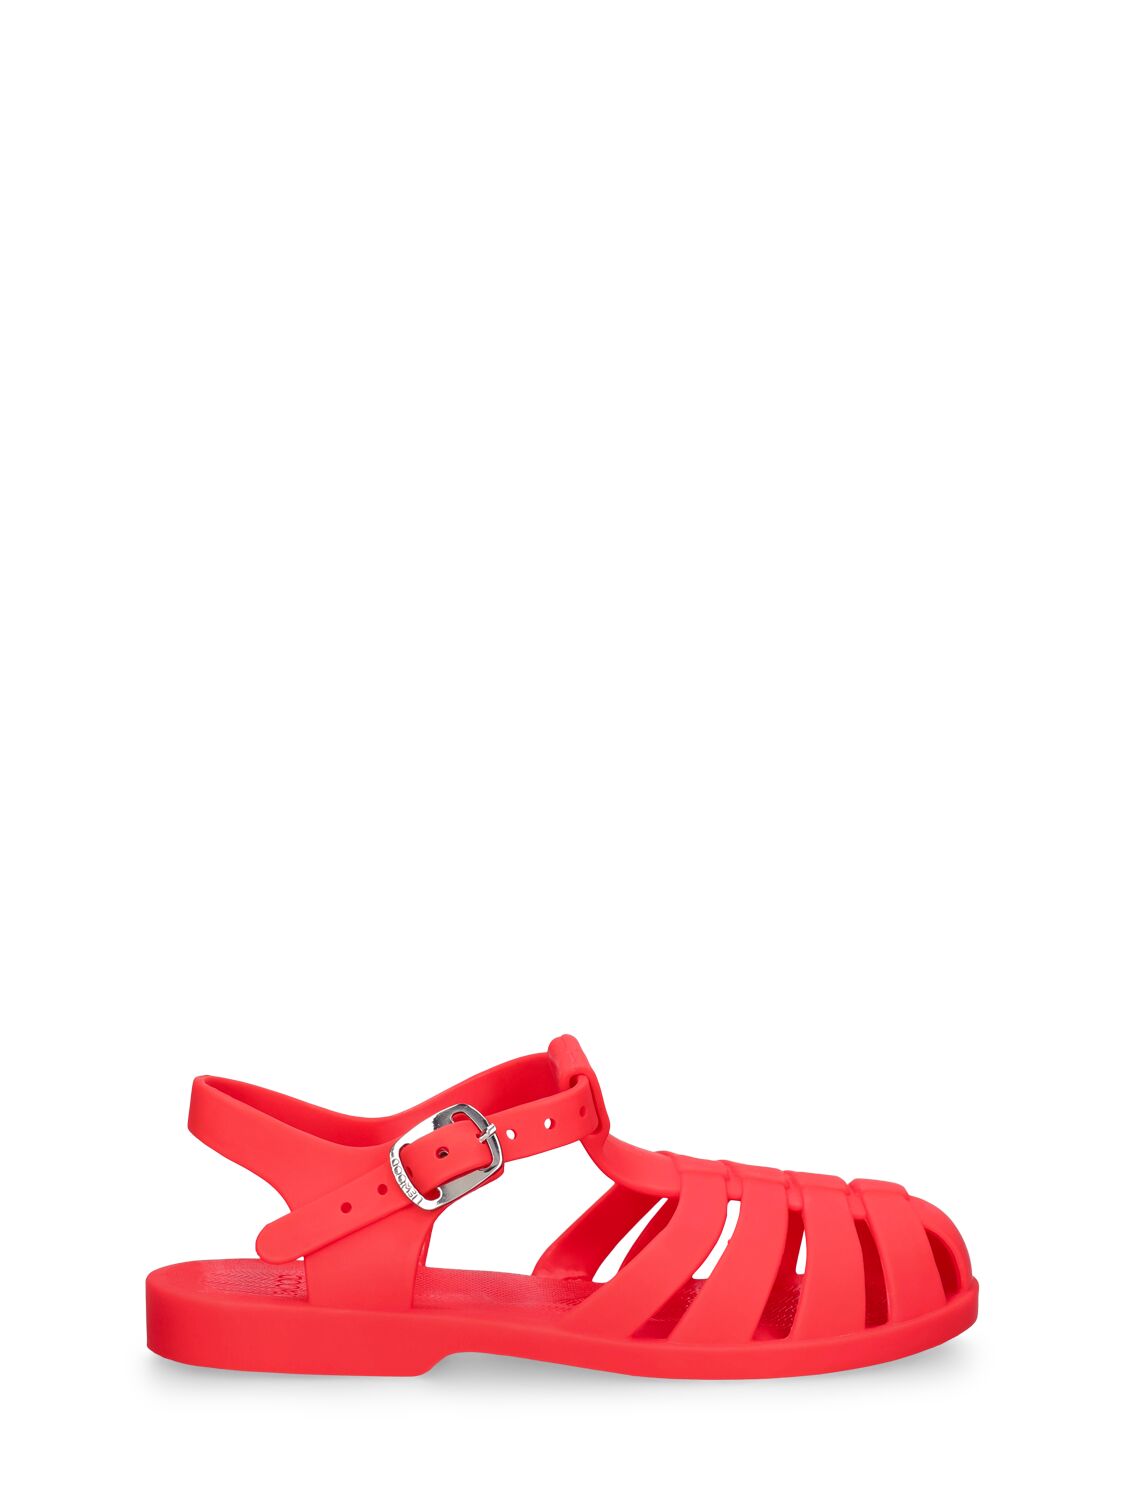 Liewood Kids' Rubber Jelly Sandals In Red